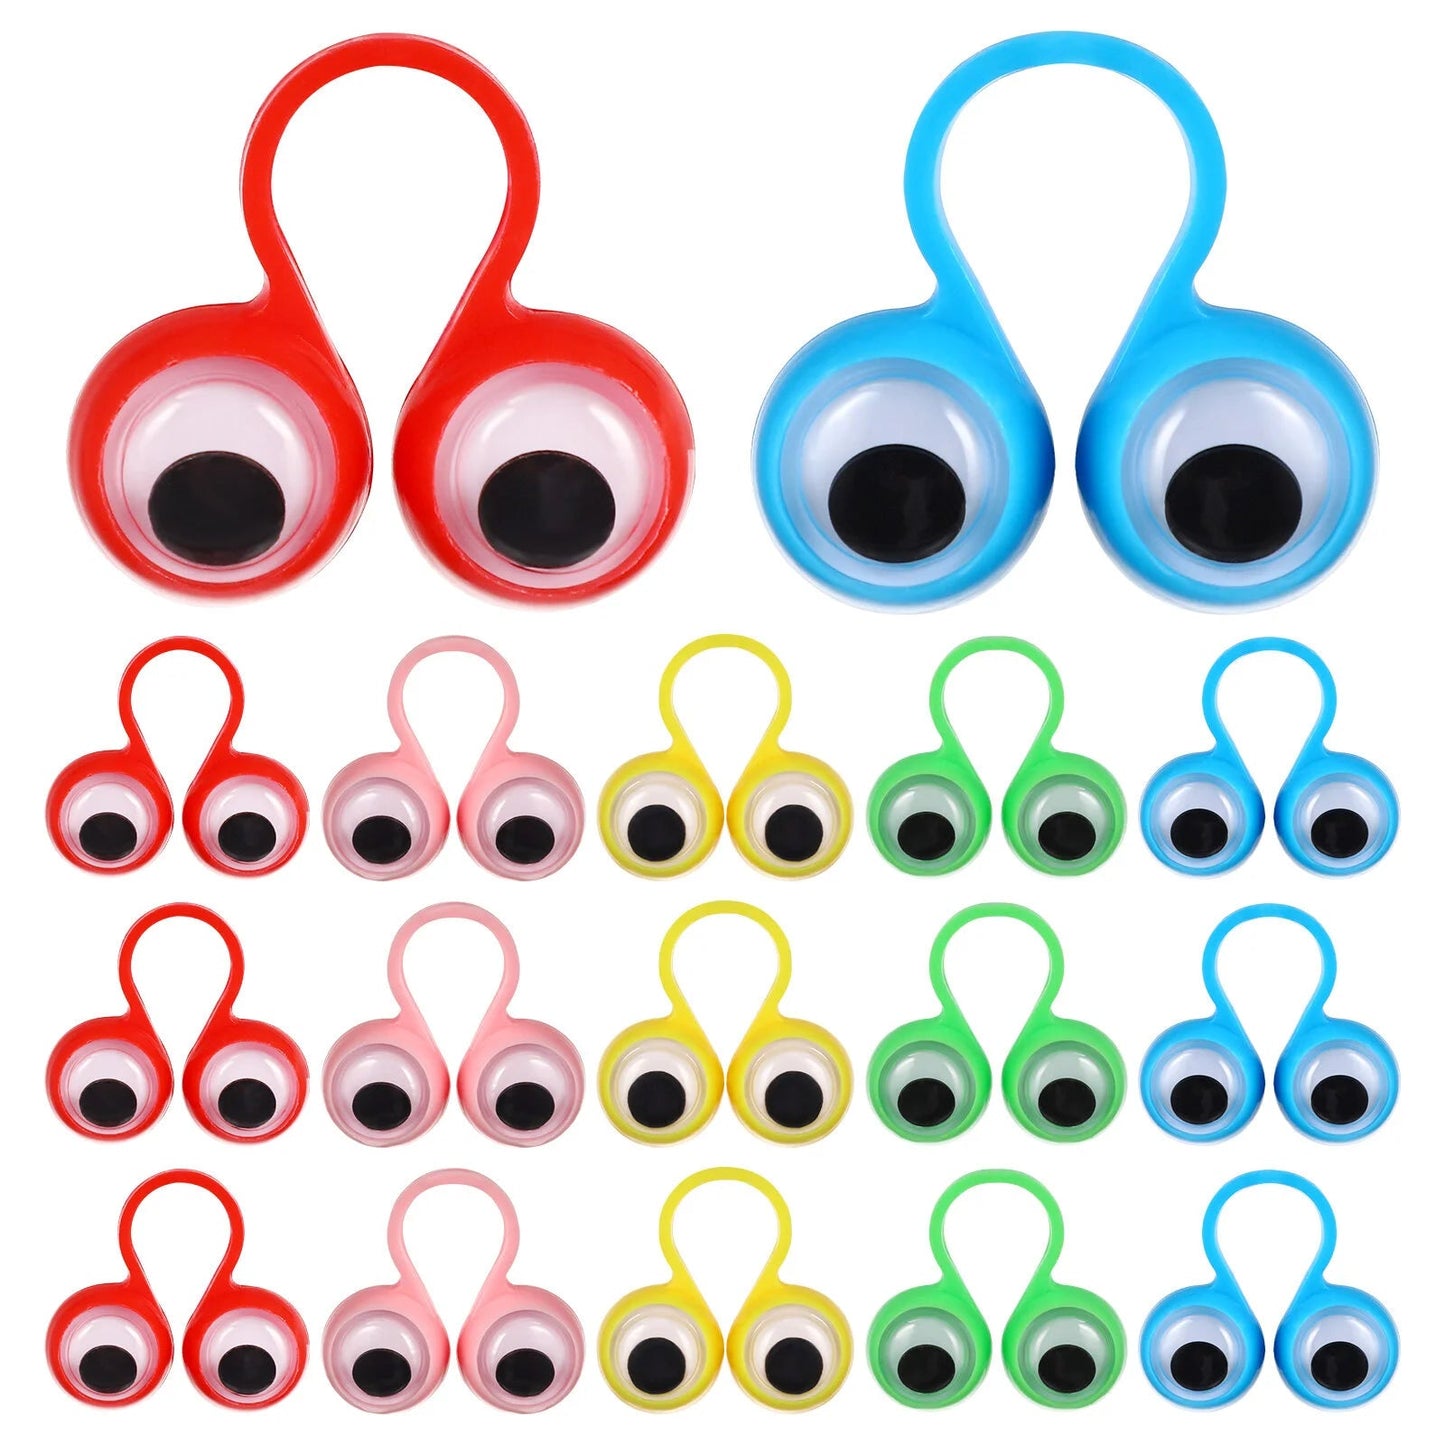 Eye Finger Puppets for Educational Role-Playing and Theater